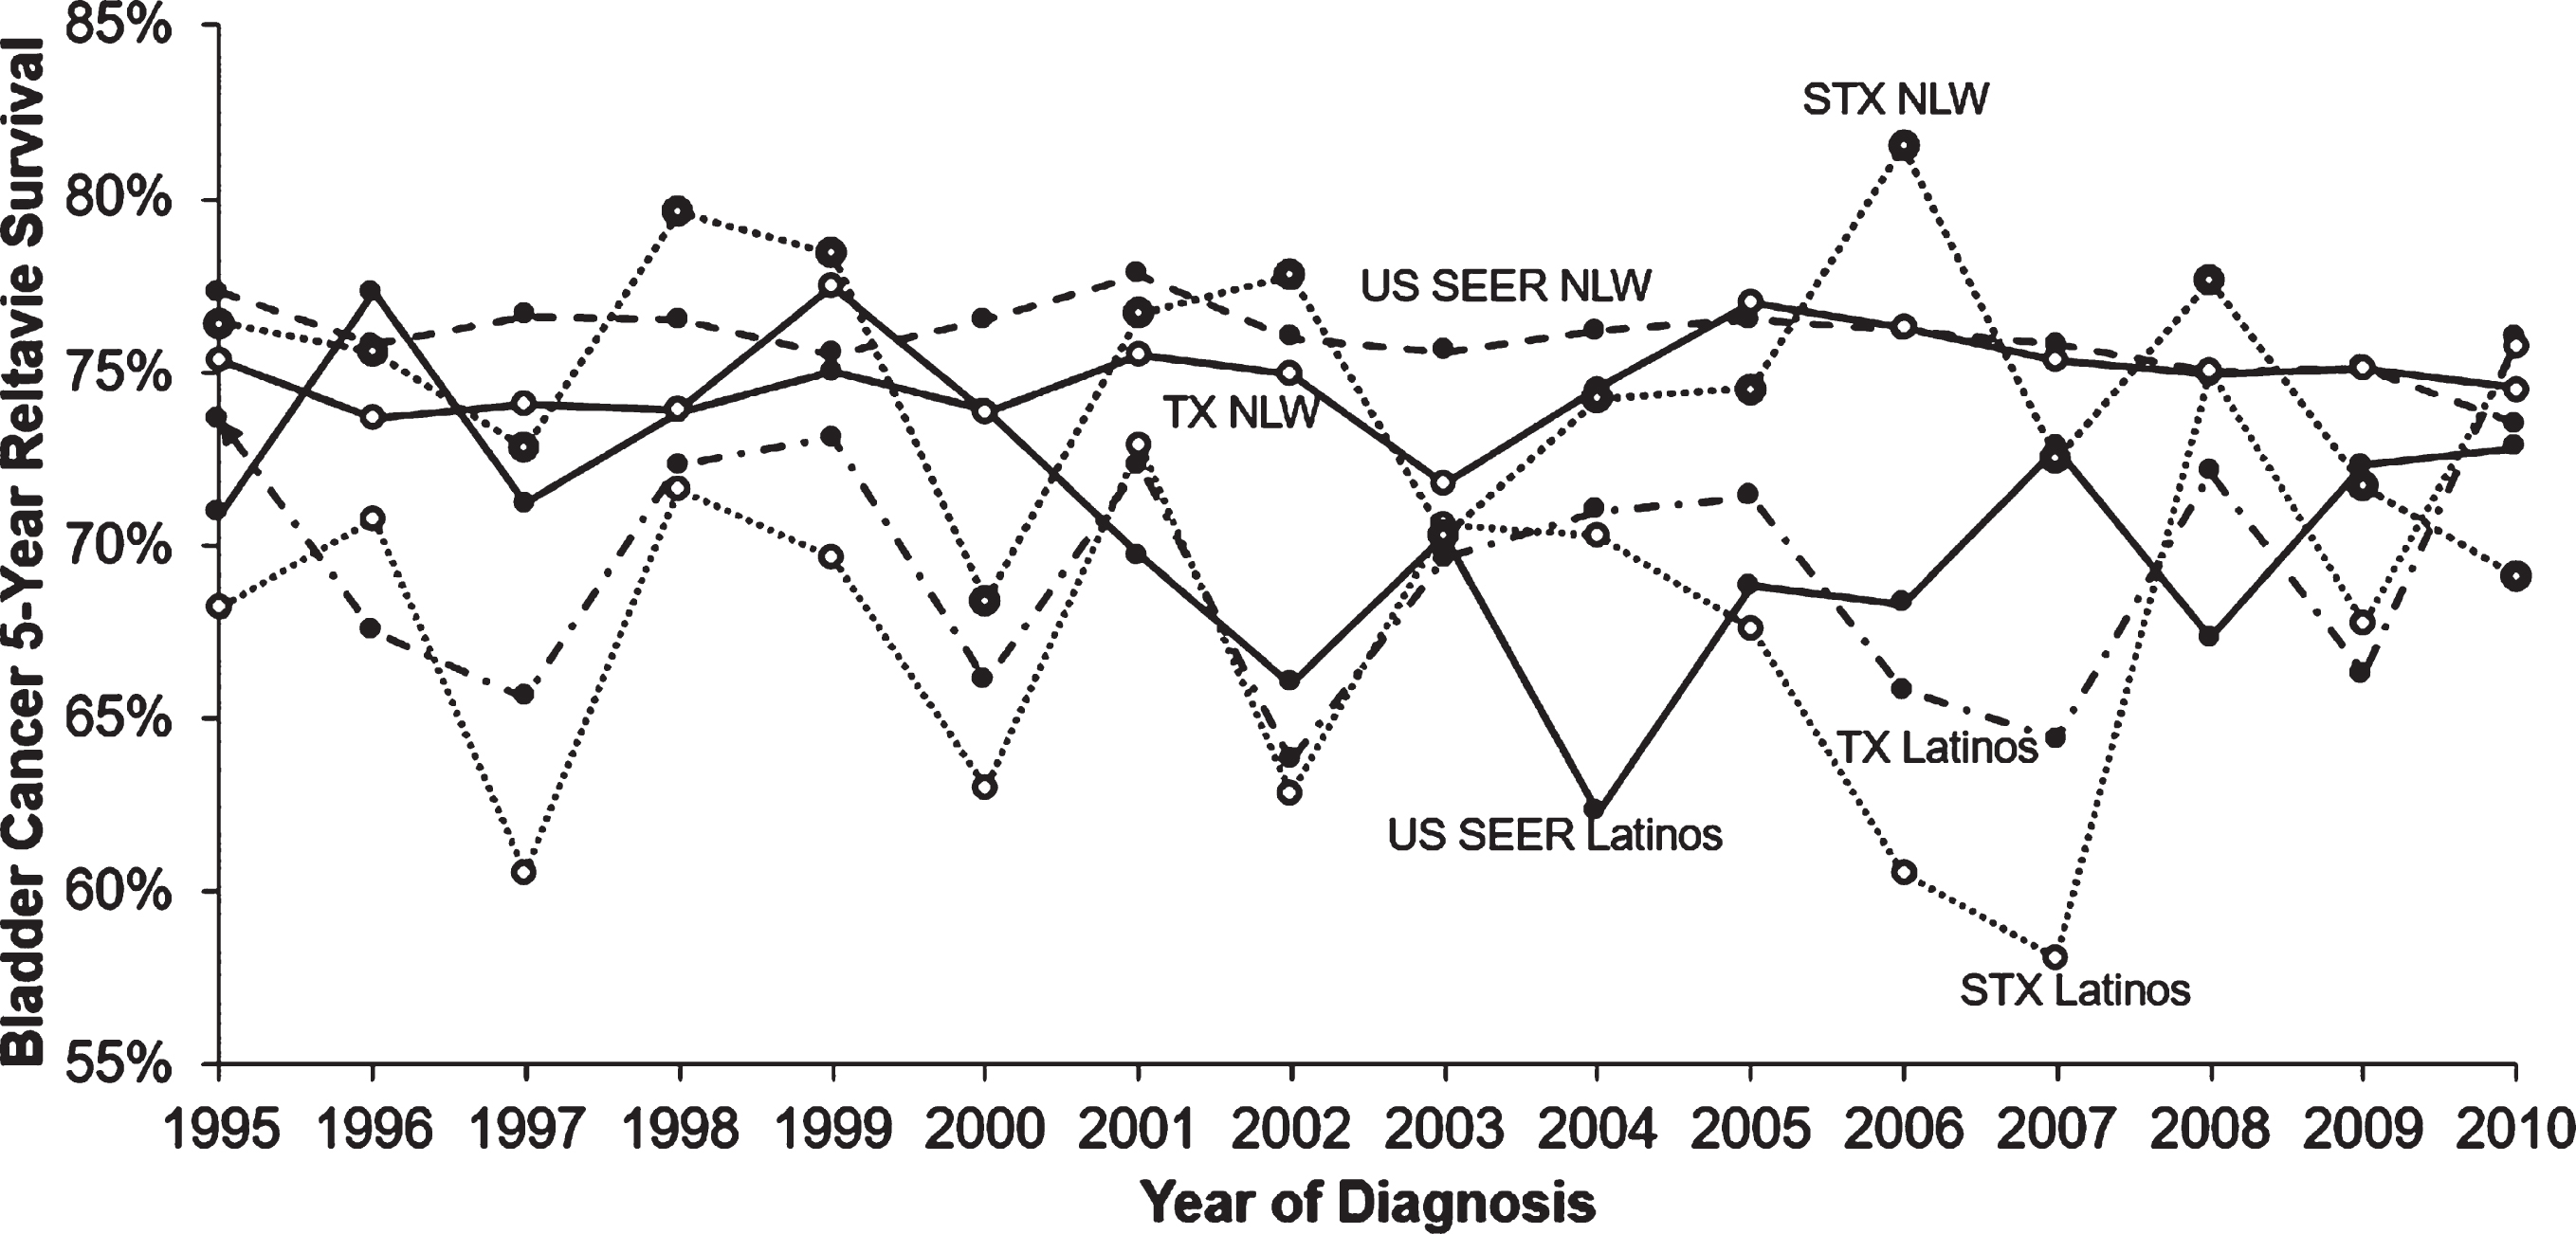 Annual 5-year relative survival rates of bladder cancer by race/ethnicity, 1995– 2010. NLW: non-Latino whites; STX: South Texas; TX: Texas; US SEER: United States Surveillance, Epidemiology, and End Results Program.